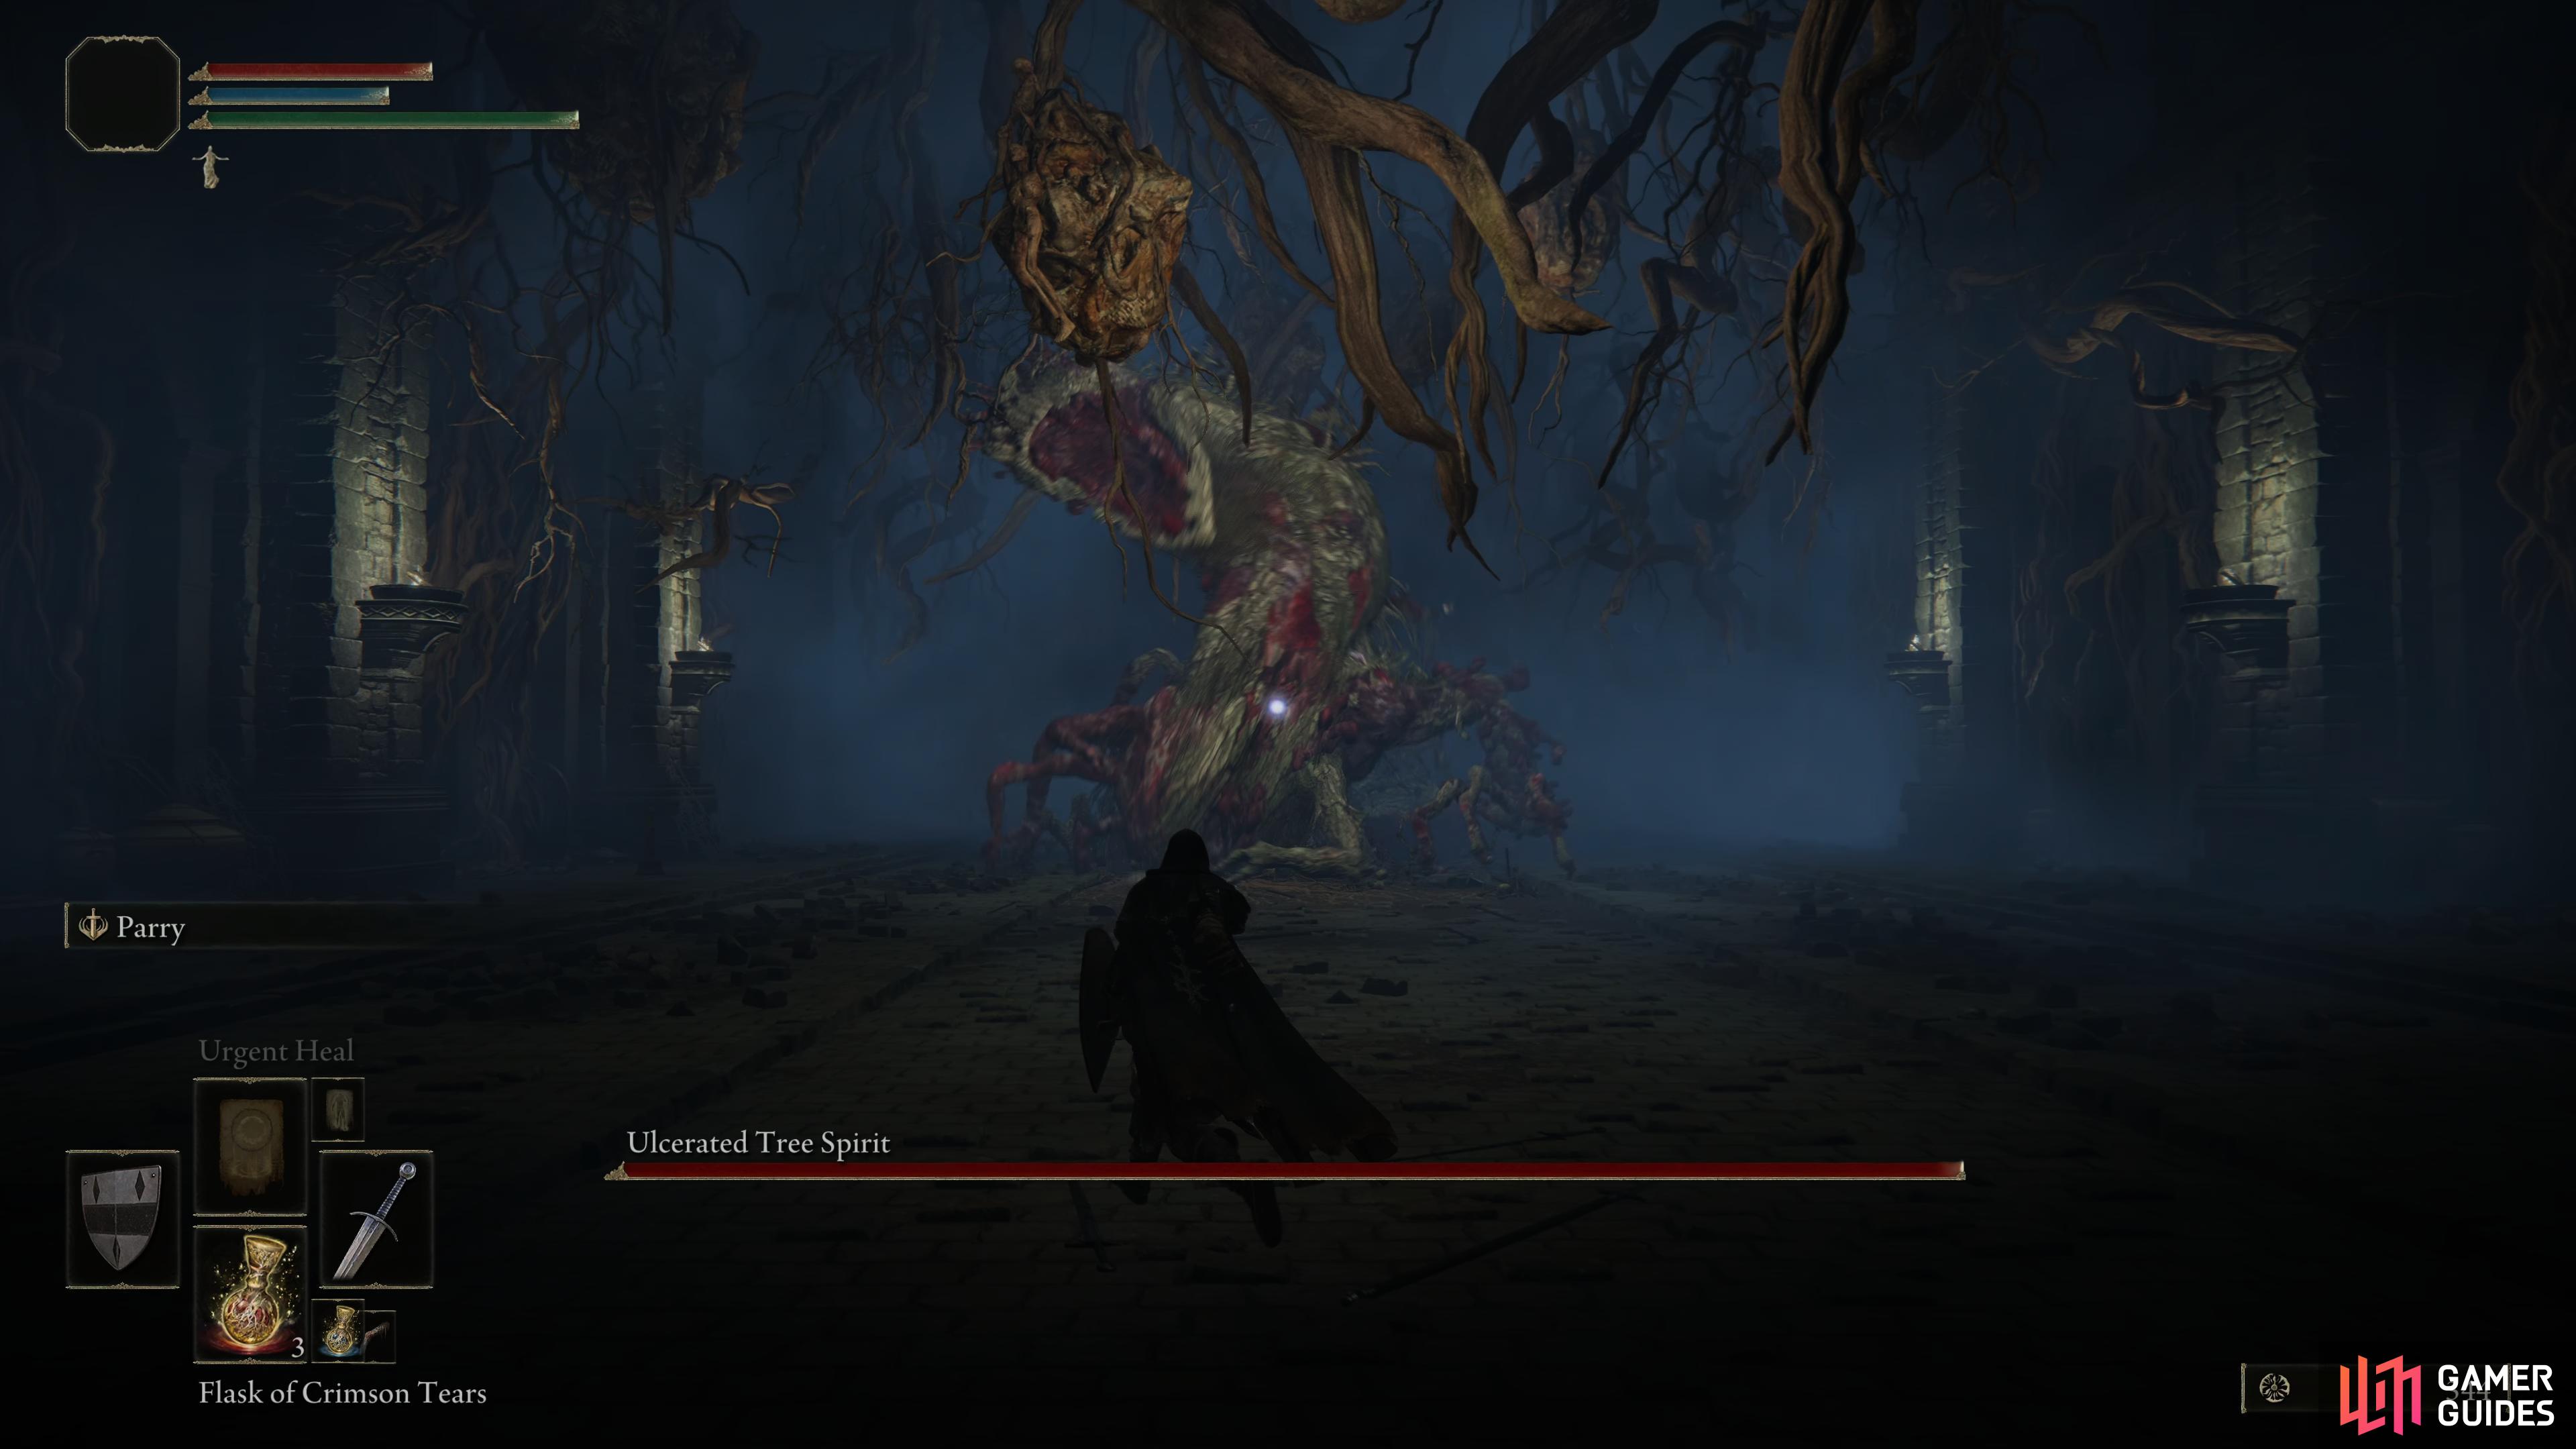 The Ulcerated Tree Spirit is a challenging Boss at the end of Fringefolk Hero's Grave.